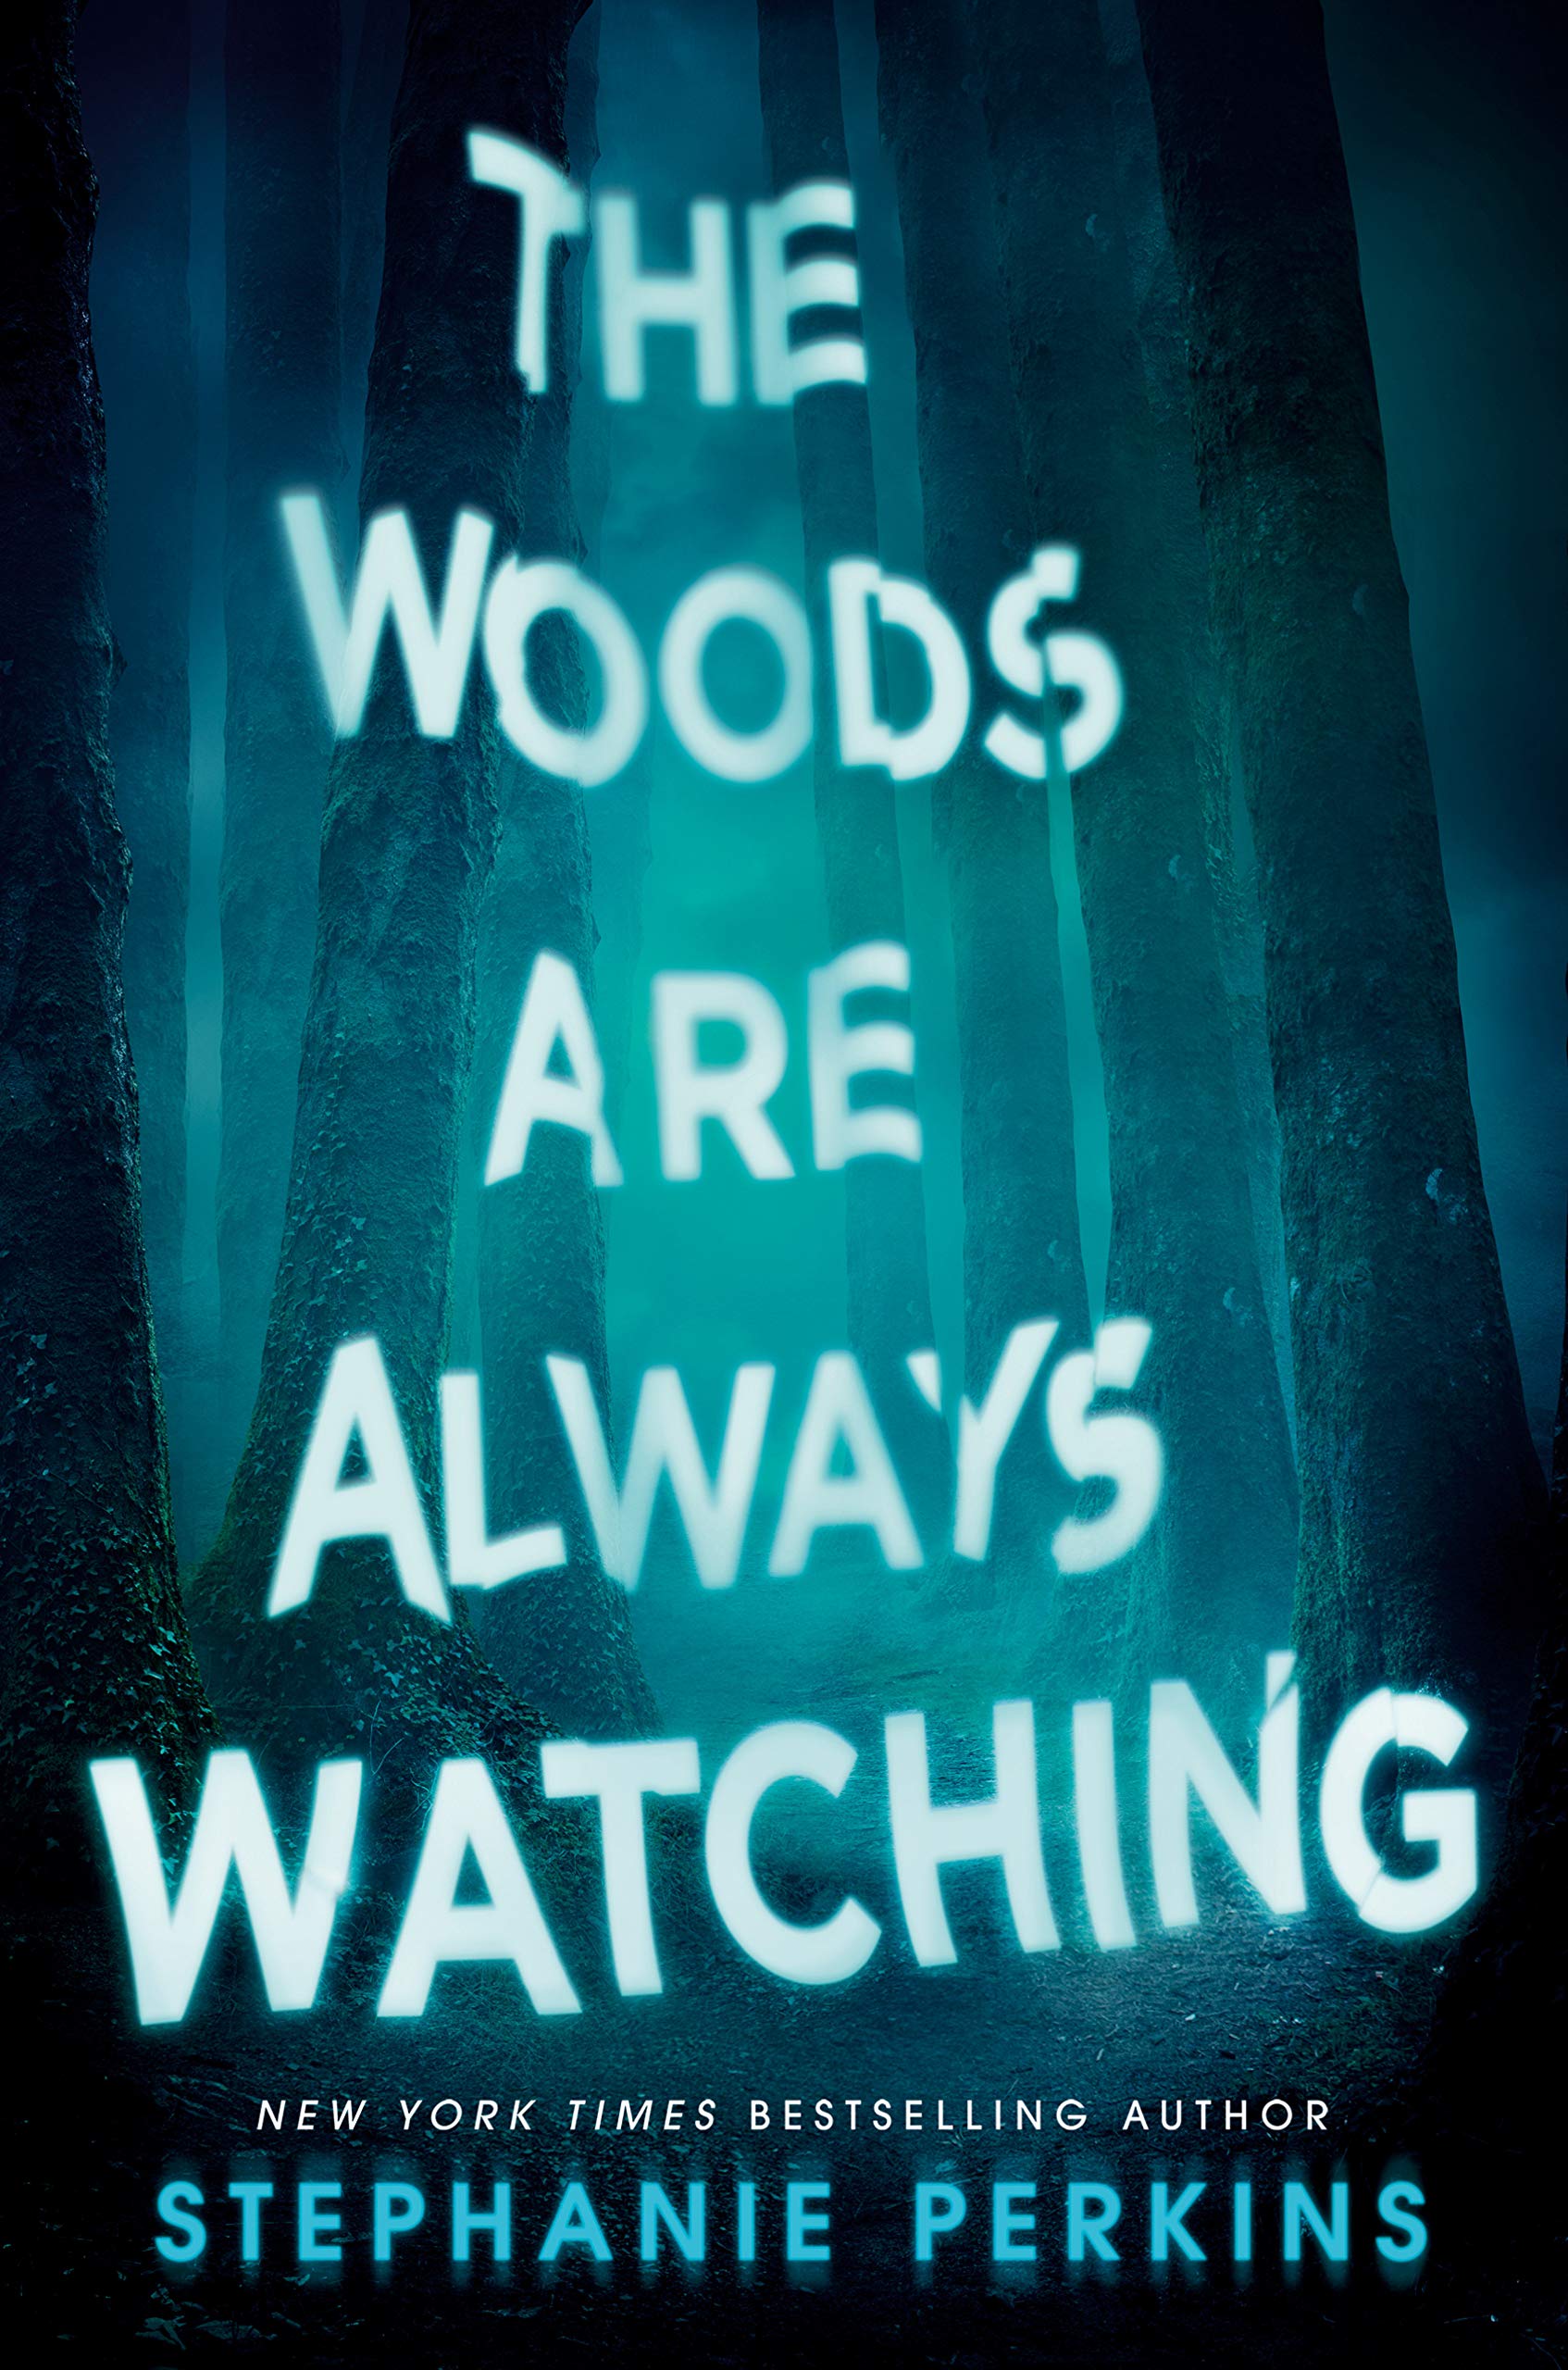 Cover of “The Woods Are Always Watching” by Stephanie Perkins